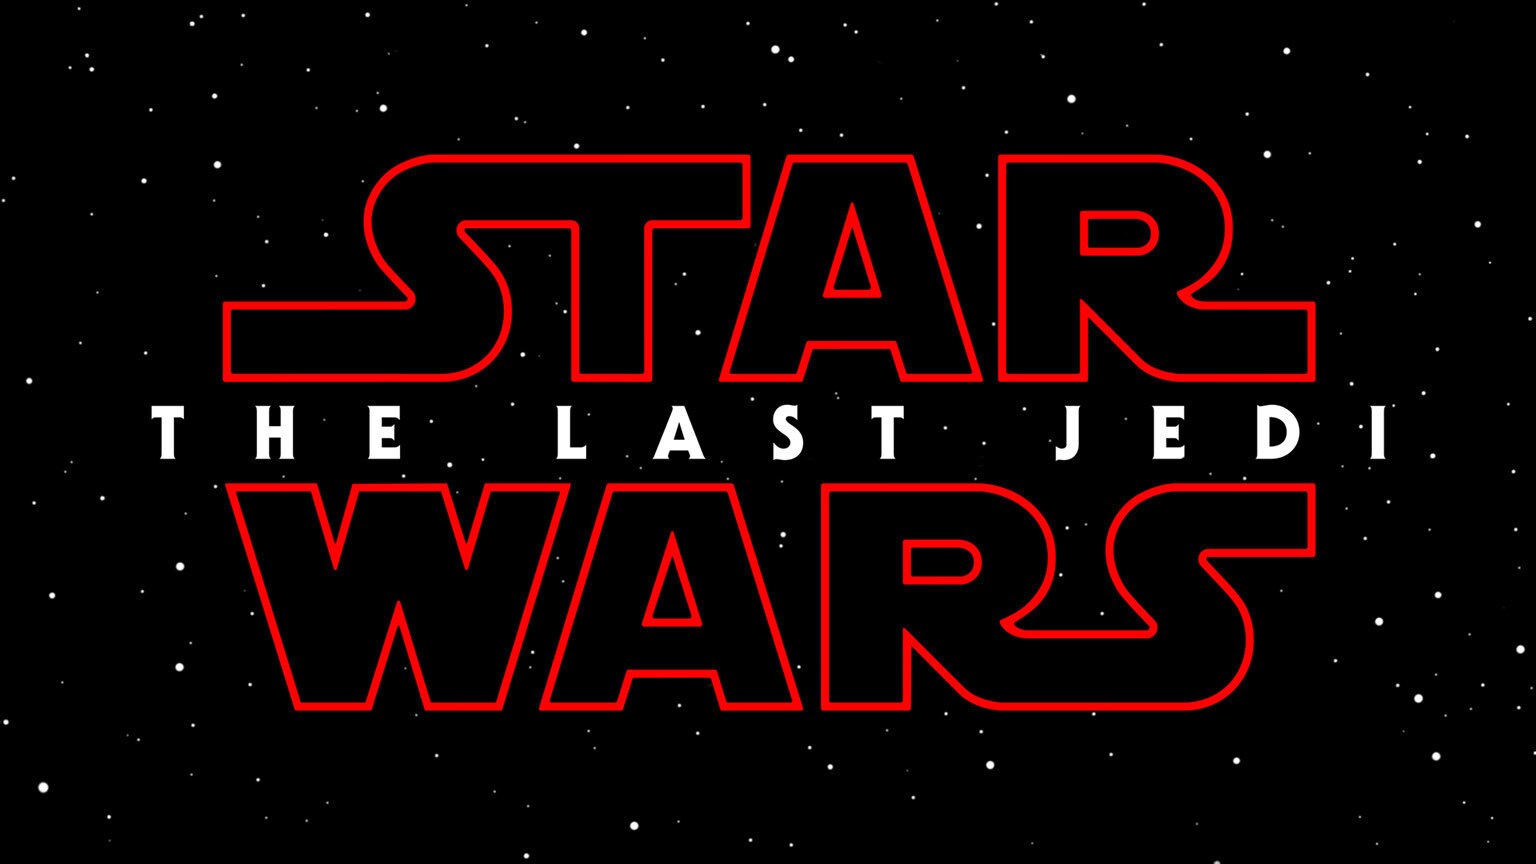 Thank You for Supporting Star Wars: The Last Jedi